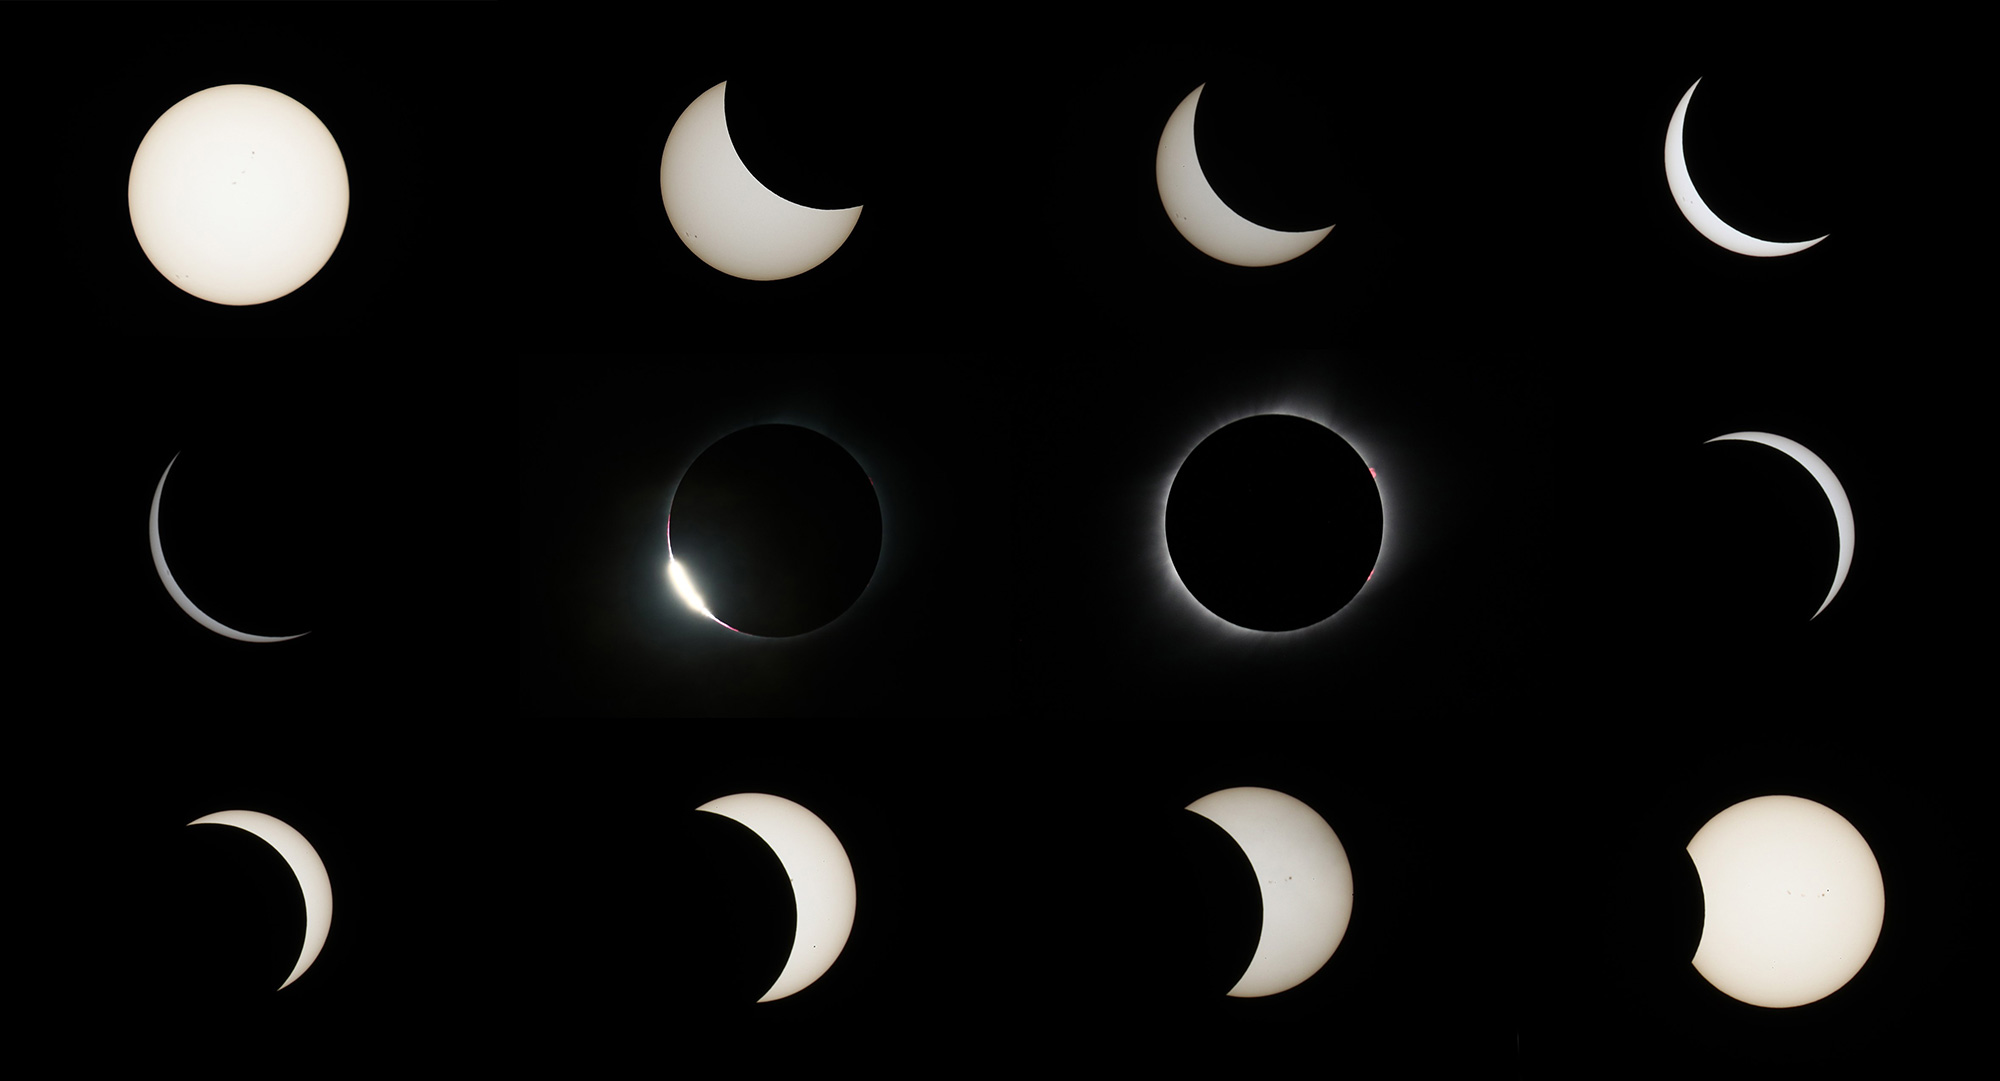 This composite image shows the progression of a solar eclipse near Illinois on August 21, 2017.